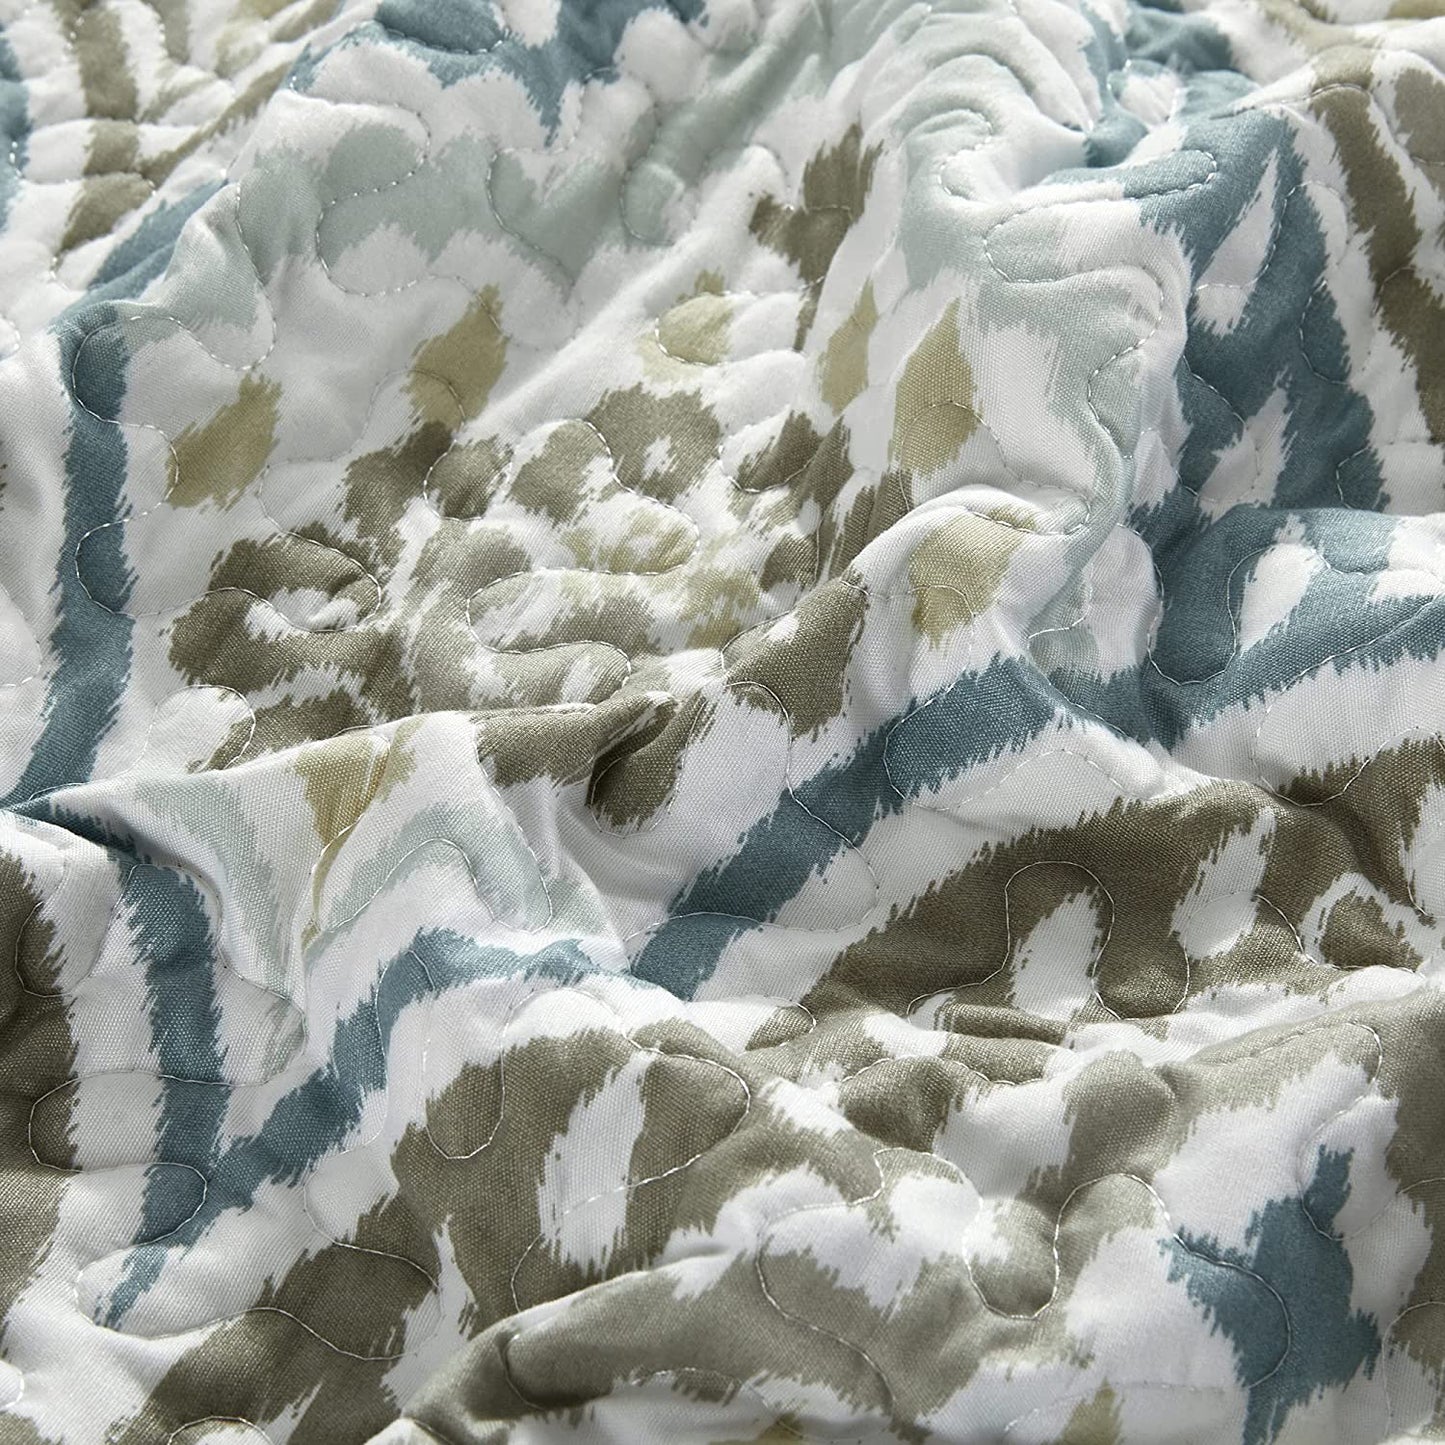 Tivoli Ikat Queen Size 90" X 90" 5 Piece Teal Aqua Printed Prewashed Quilted Coverlet Bedspread Bed Cover Set for All Season, Lightweight Quilt Blanket with Matching Shams Pillows